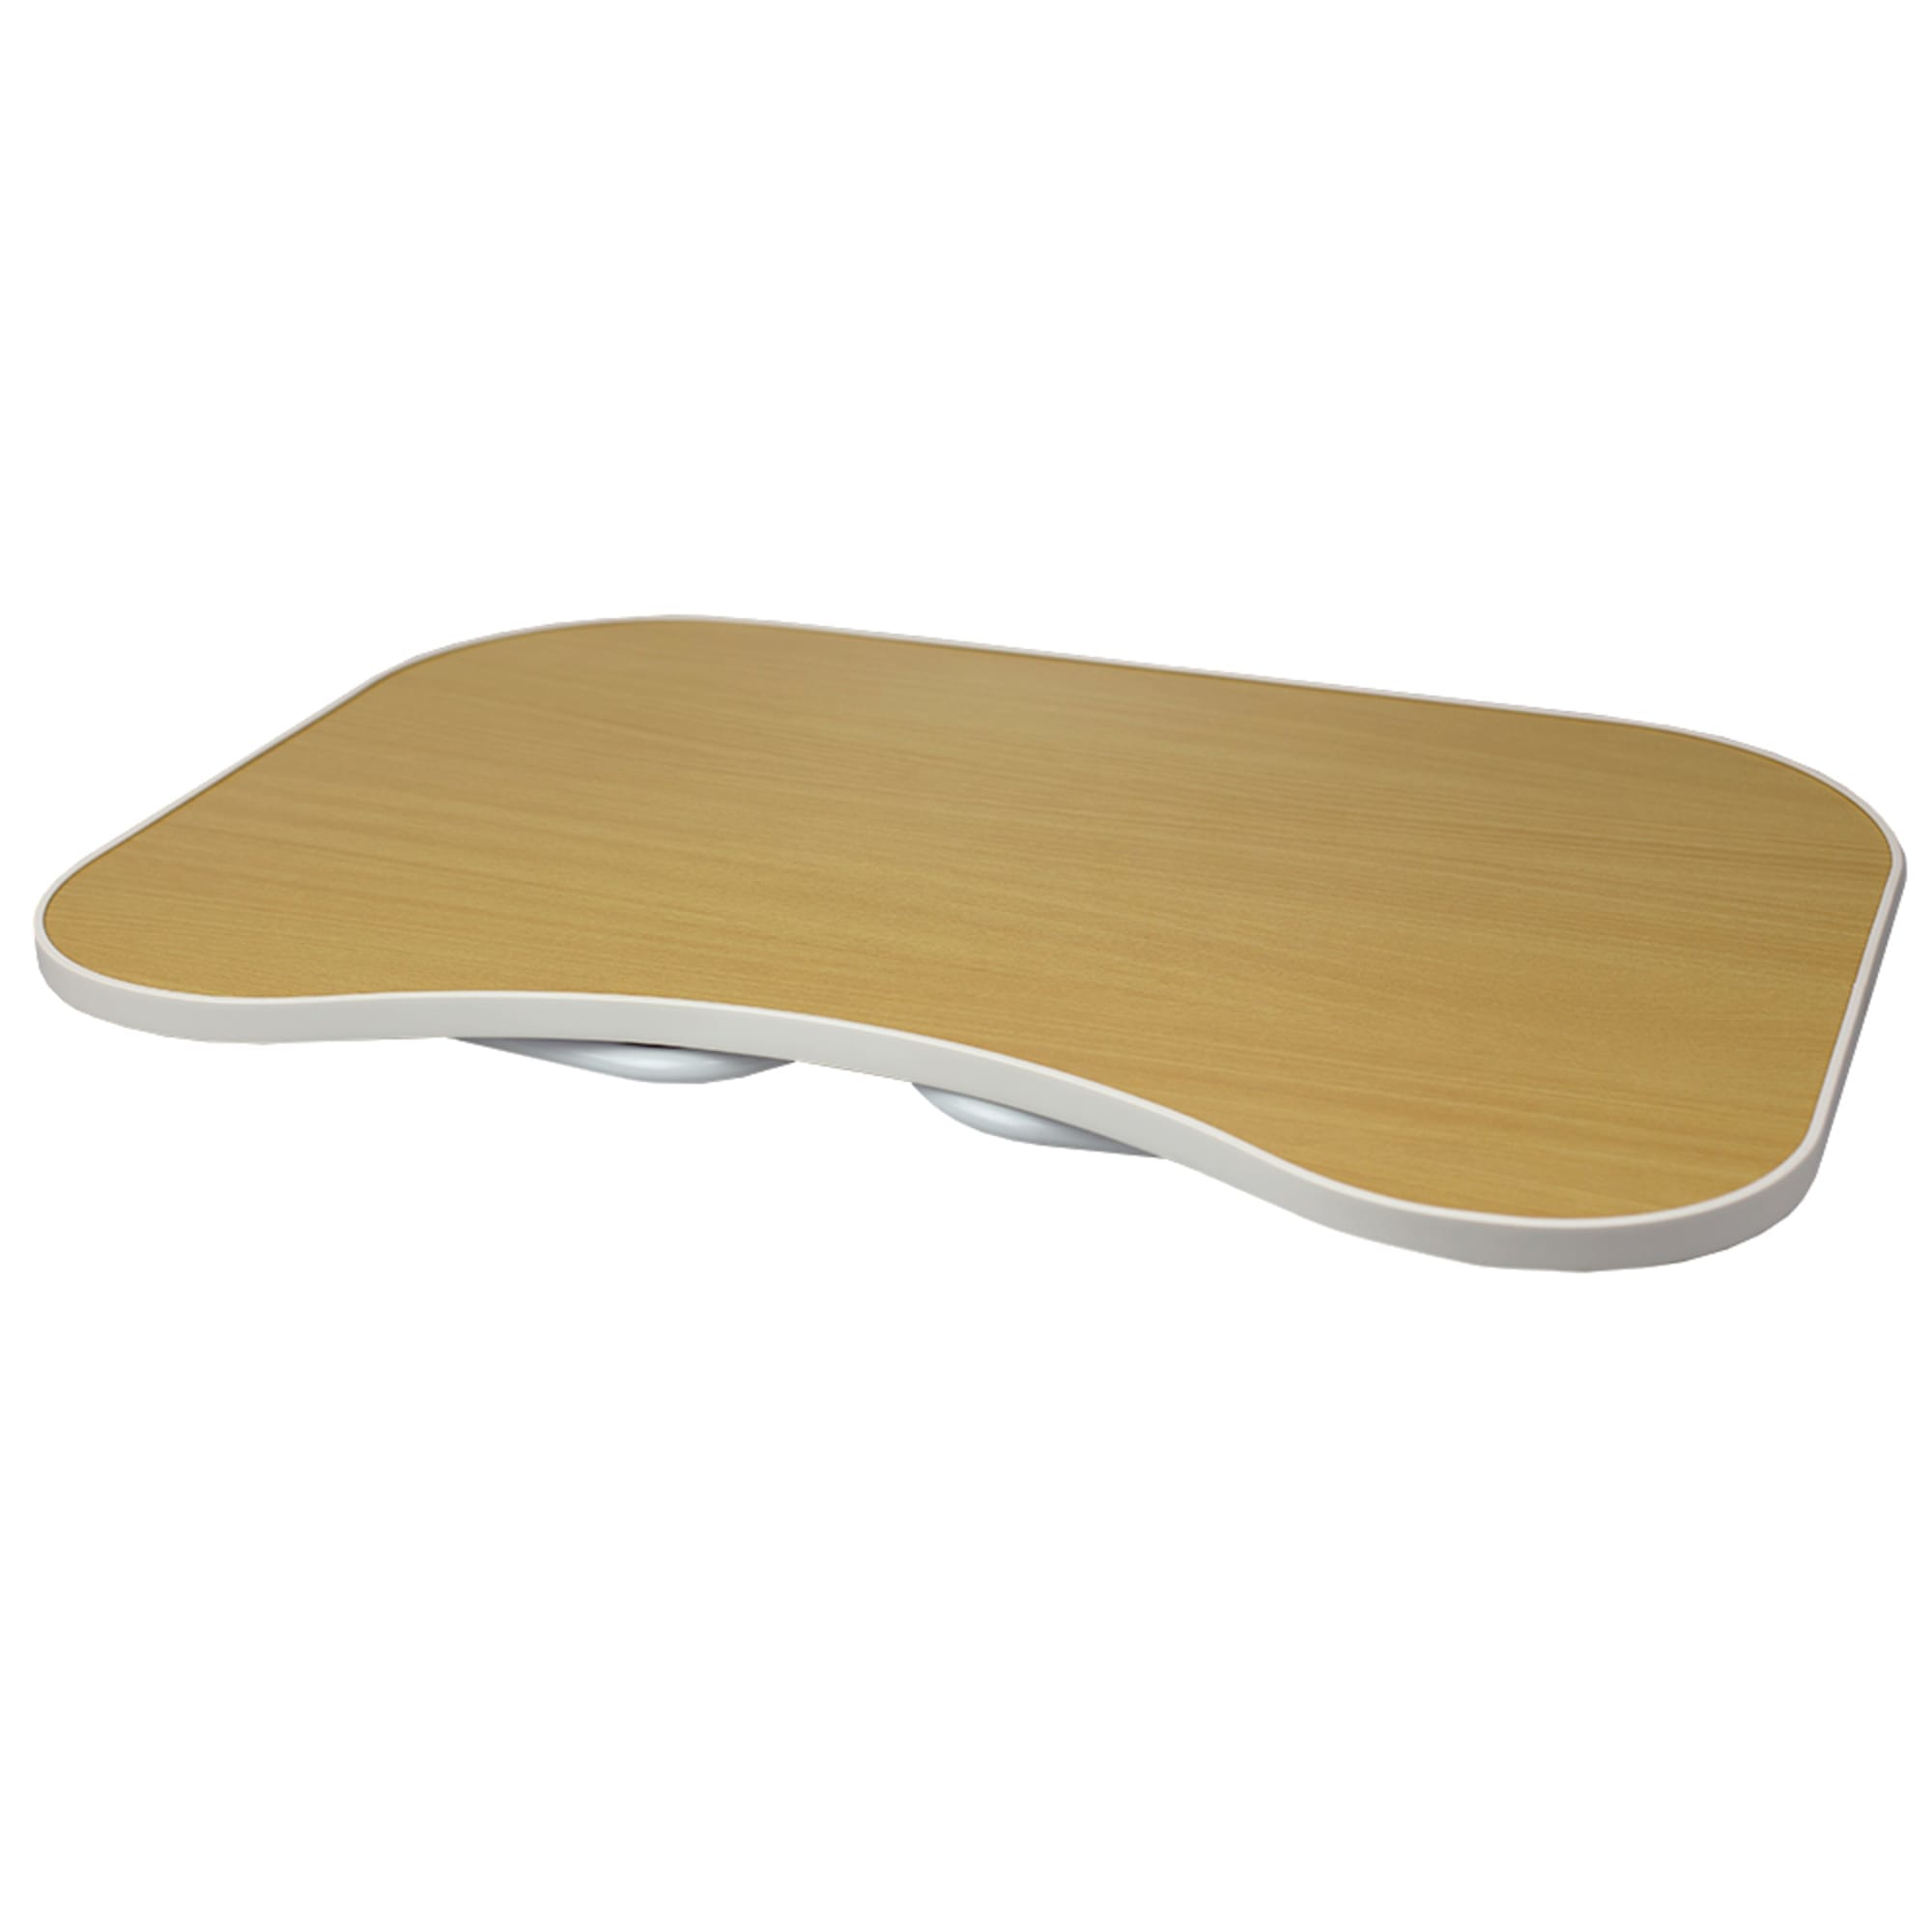 Home Basics Folding Portable  Laptop Bed Tray, Natural Wood $12.00 EACH, CASE PACK OF 1